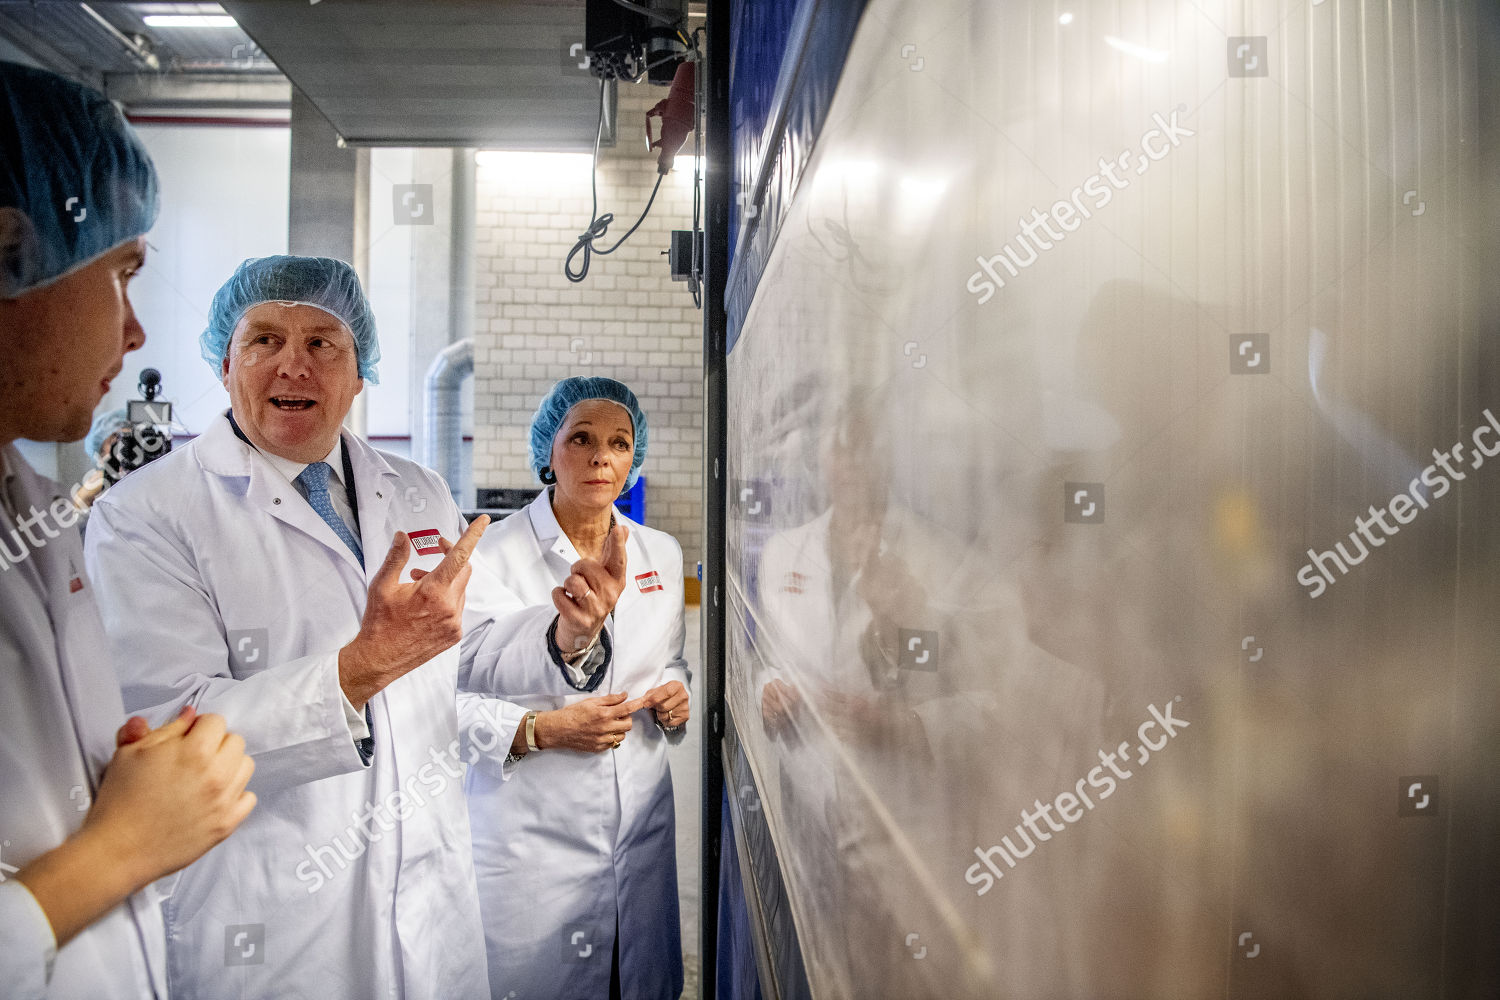 king-willem-alexander-is-making-a-working-visit-to-two-companies-in-brainport-eindhoven-helmond-the-netherlands-shutterstock-editorial-10031459p.jpg